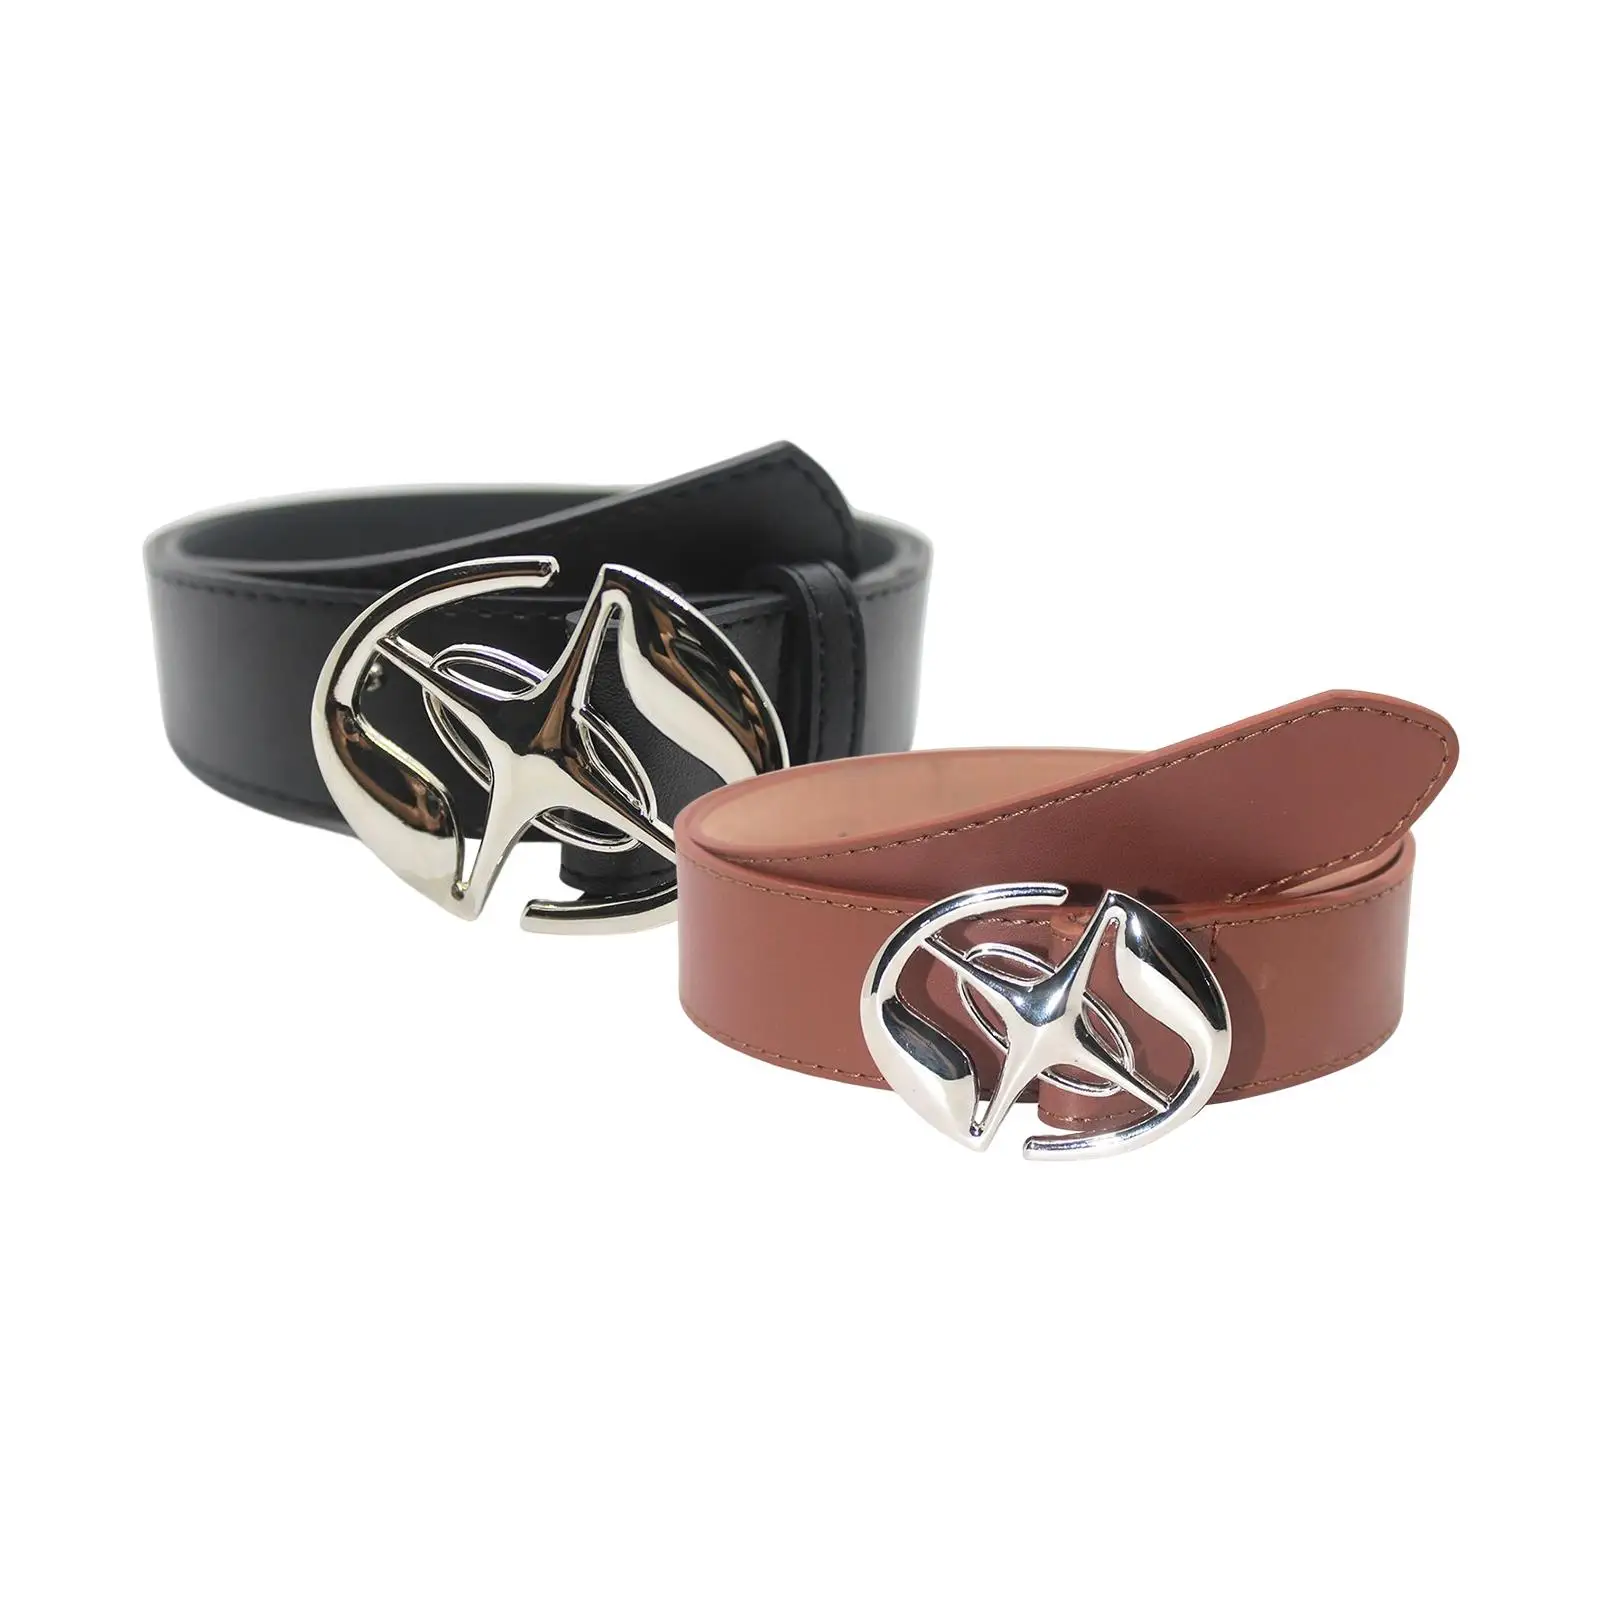 PU Leather Women Belt Ladies Belts with Alloy Pin Buckle Casual Dress Waist Belt Trousers Accessories Jeans Pants Travel